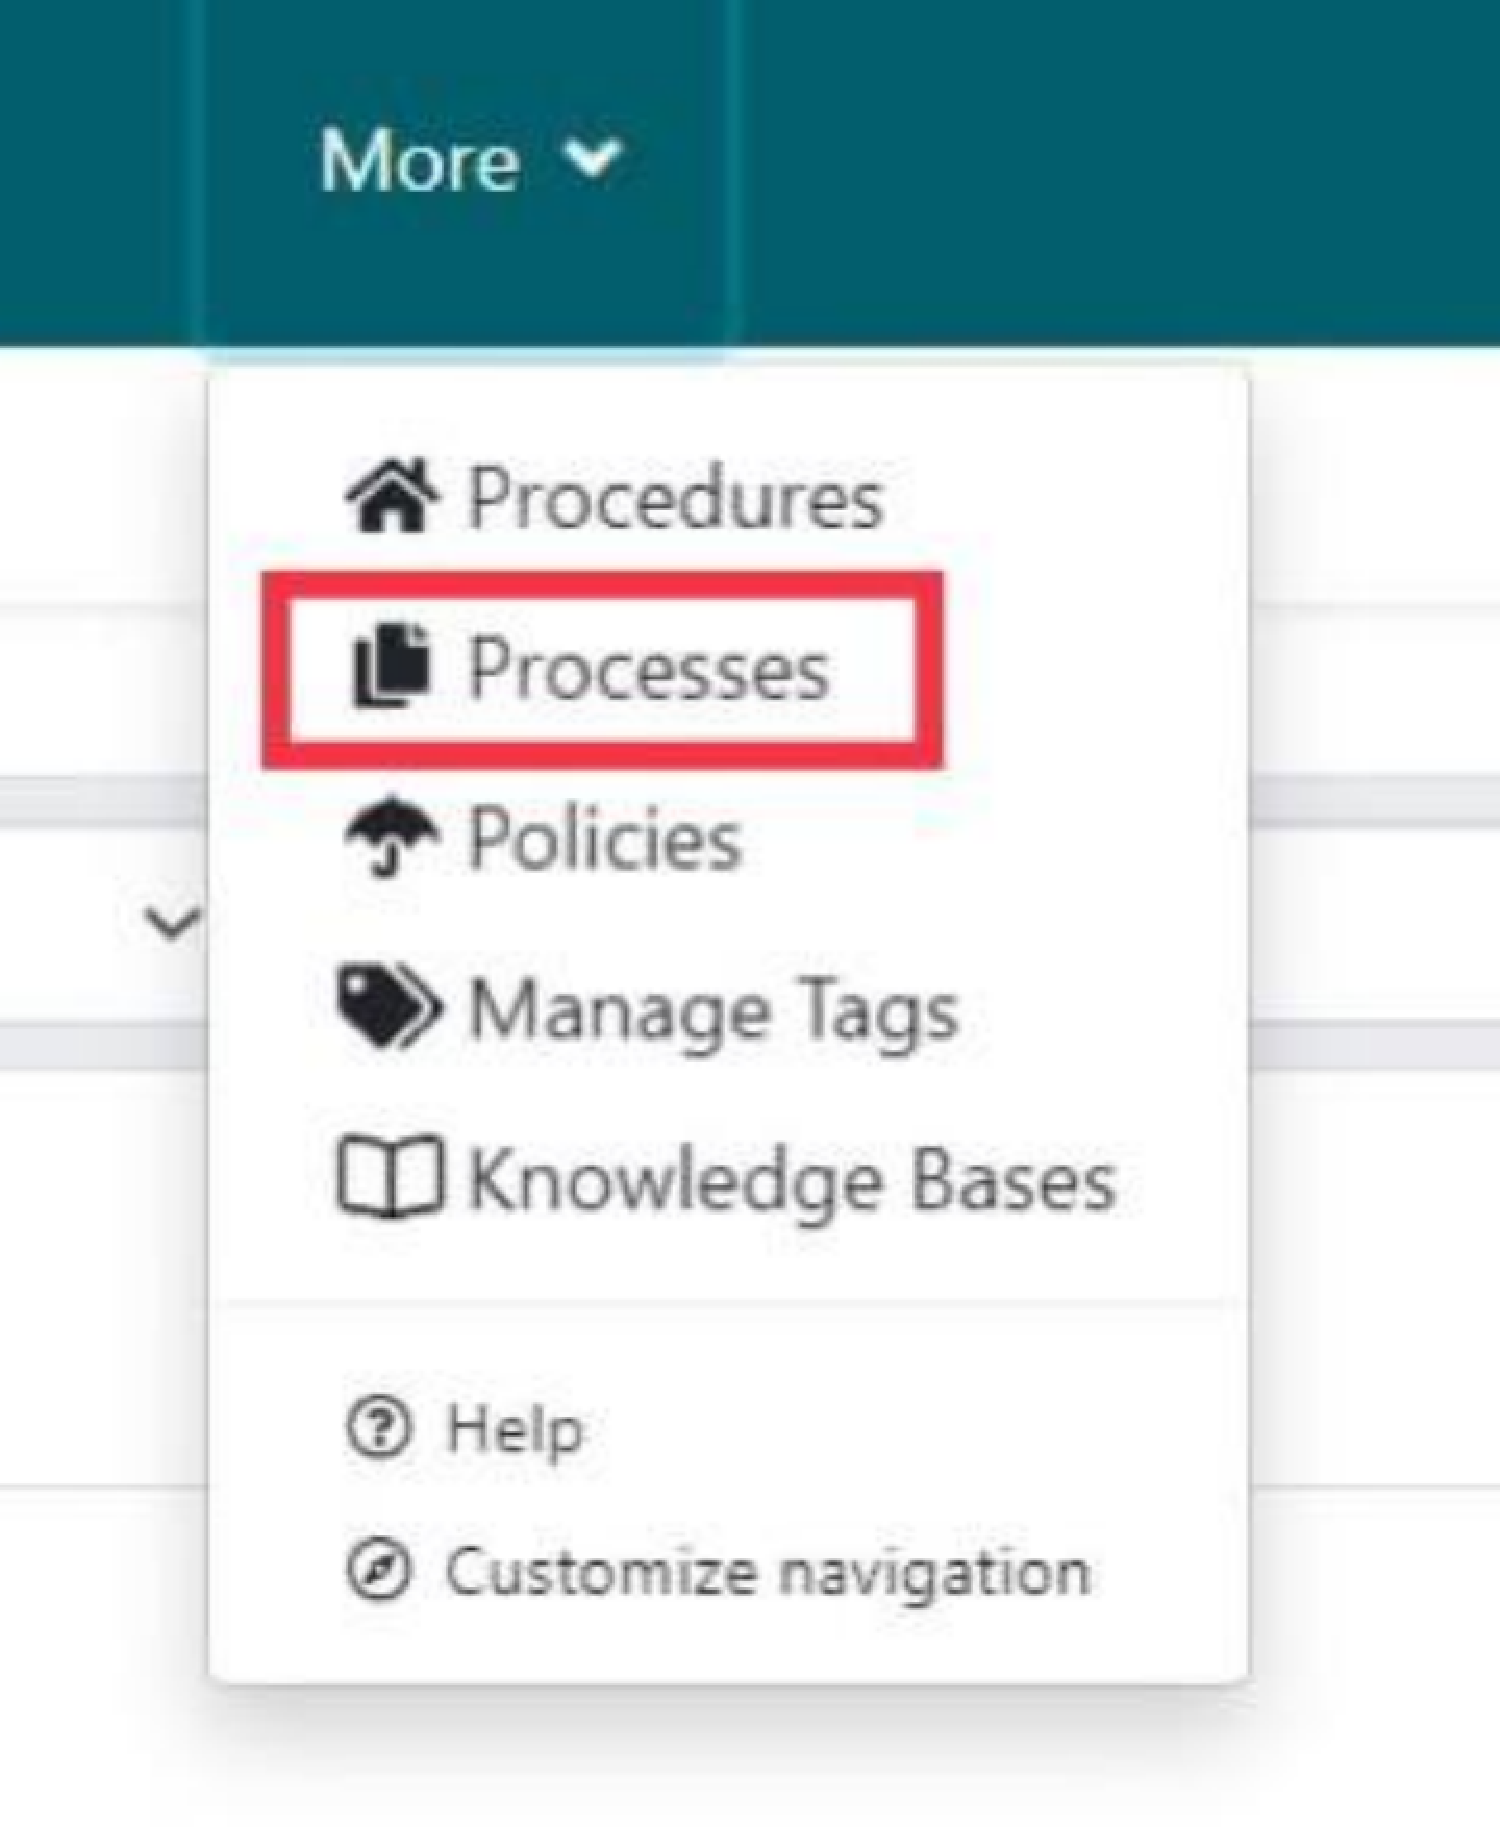 “Processes” tab under the “More” option.